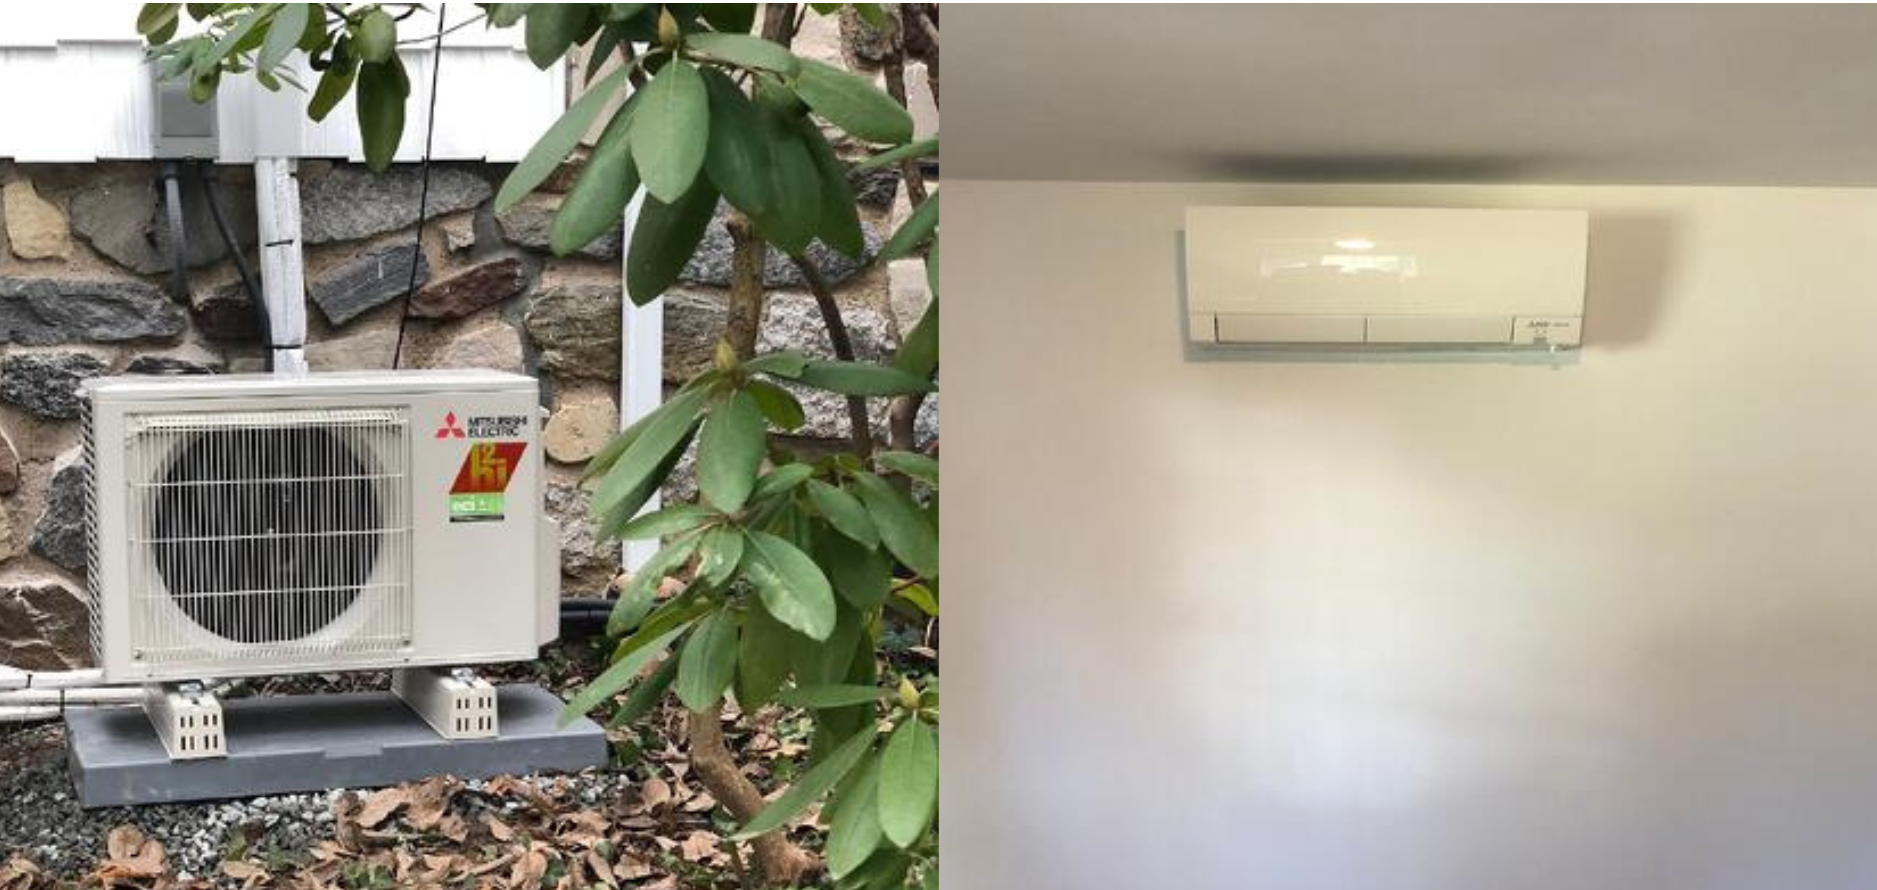 Merion Station outdoor hyper heat pump installed with single zone Mitsubishi unit